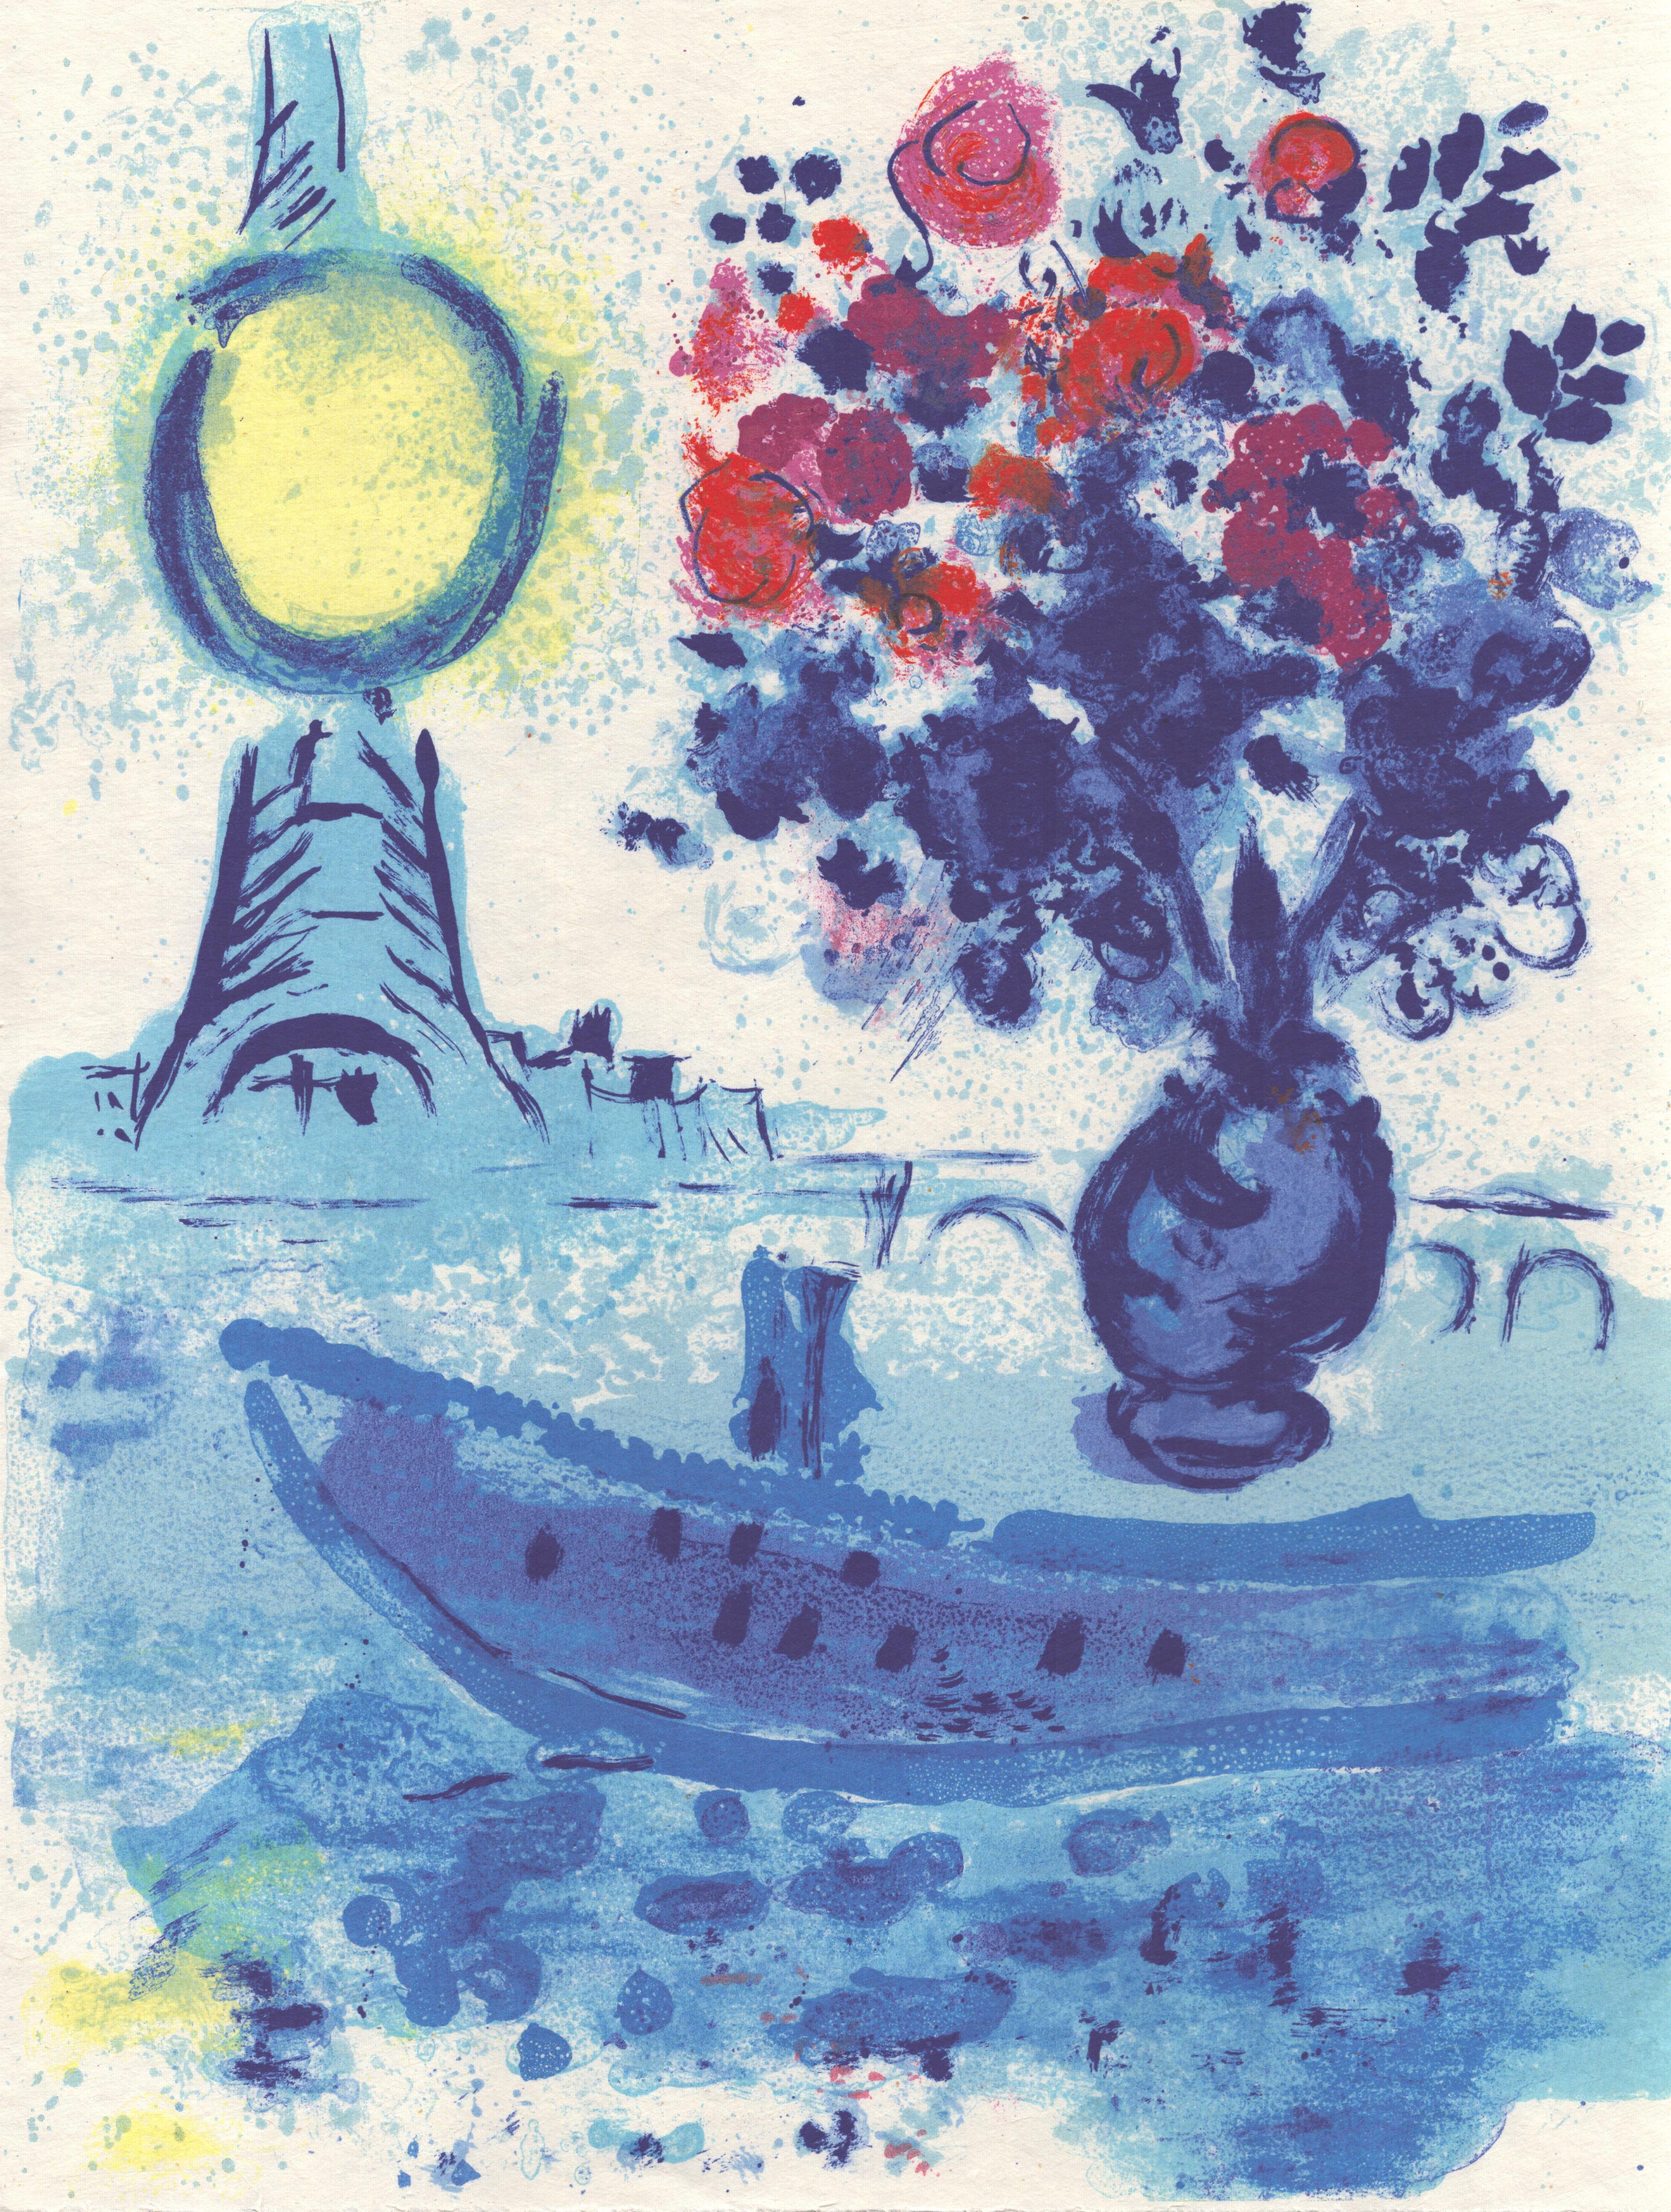 Marc Chagall   
Bateau Mouche au bouquet, 1961
Original Lithograph
Unnumbered of the edition of 180
Sheet Size: 39 * 30 cm 
Unsigned 
Reference  Mourlot 352

